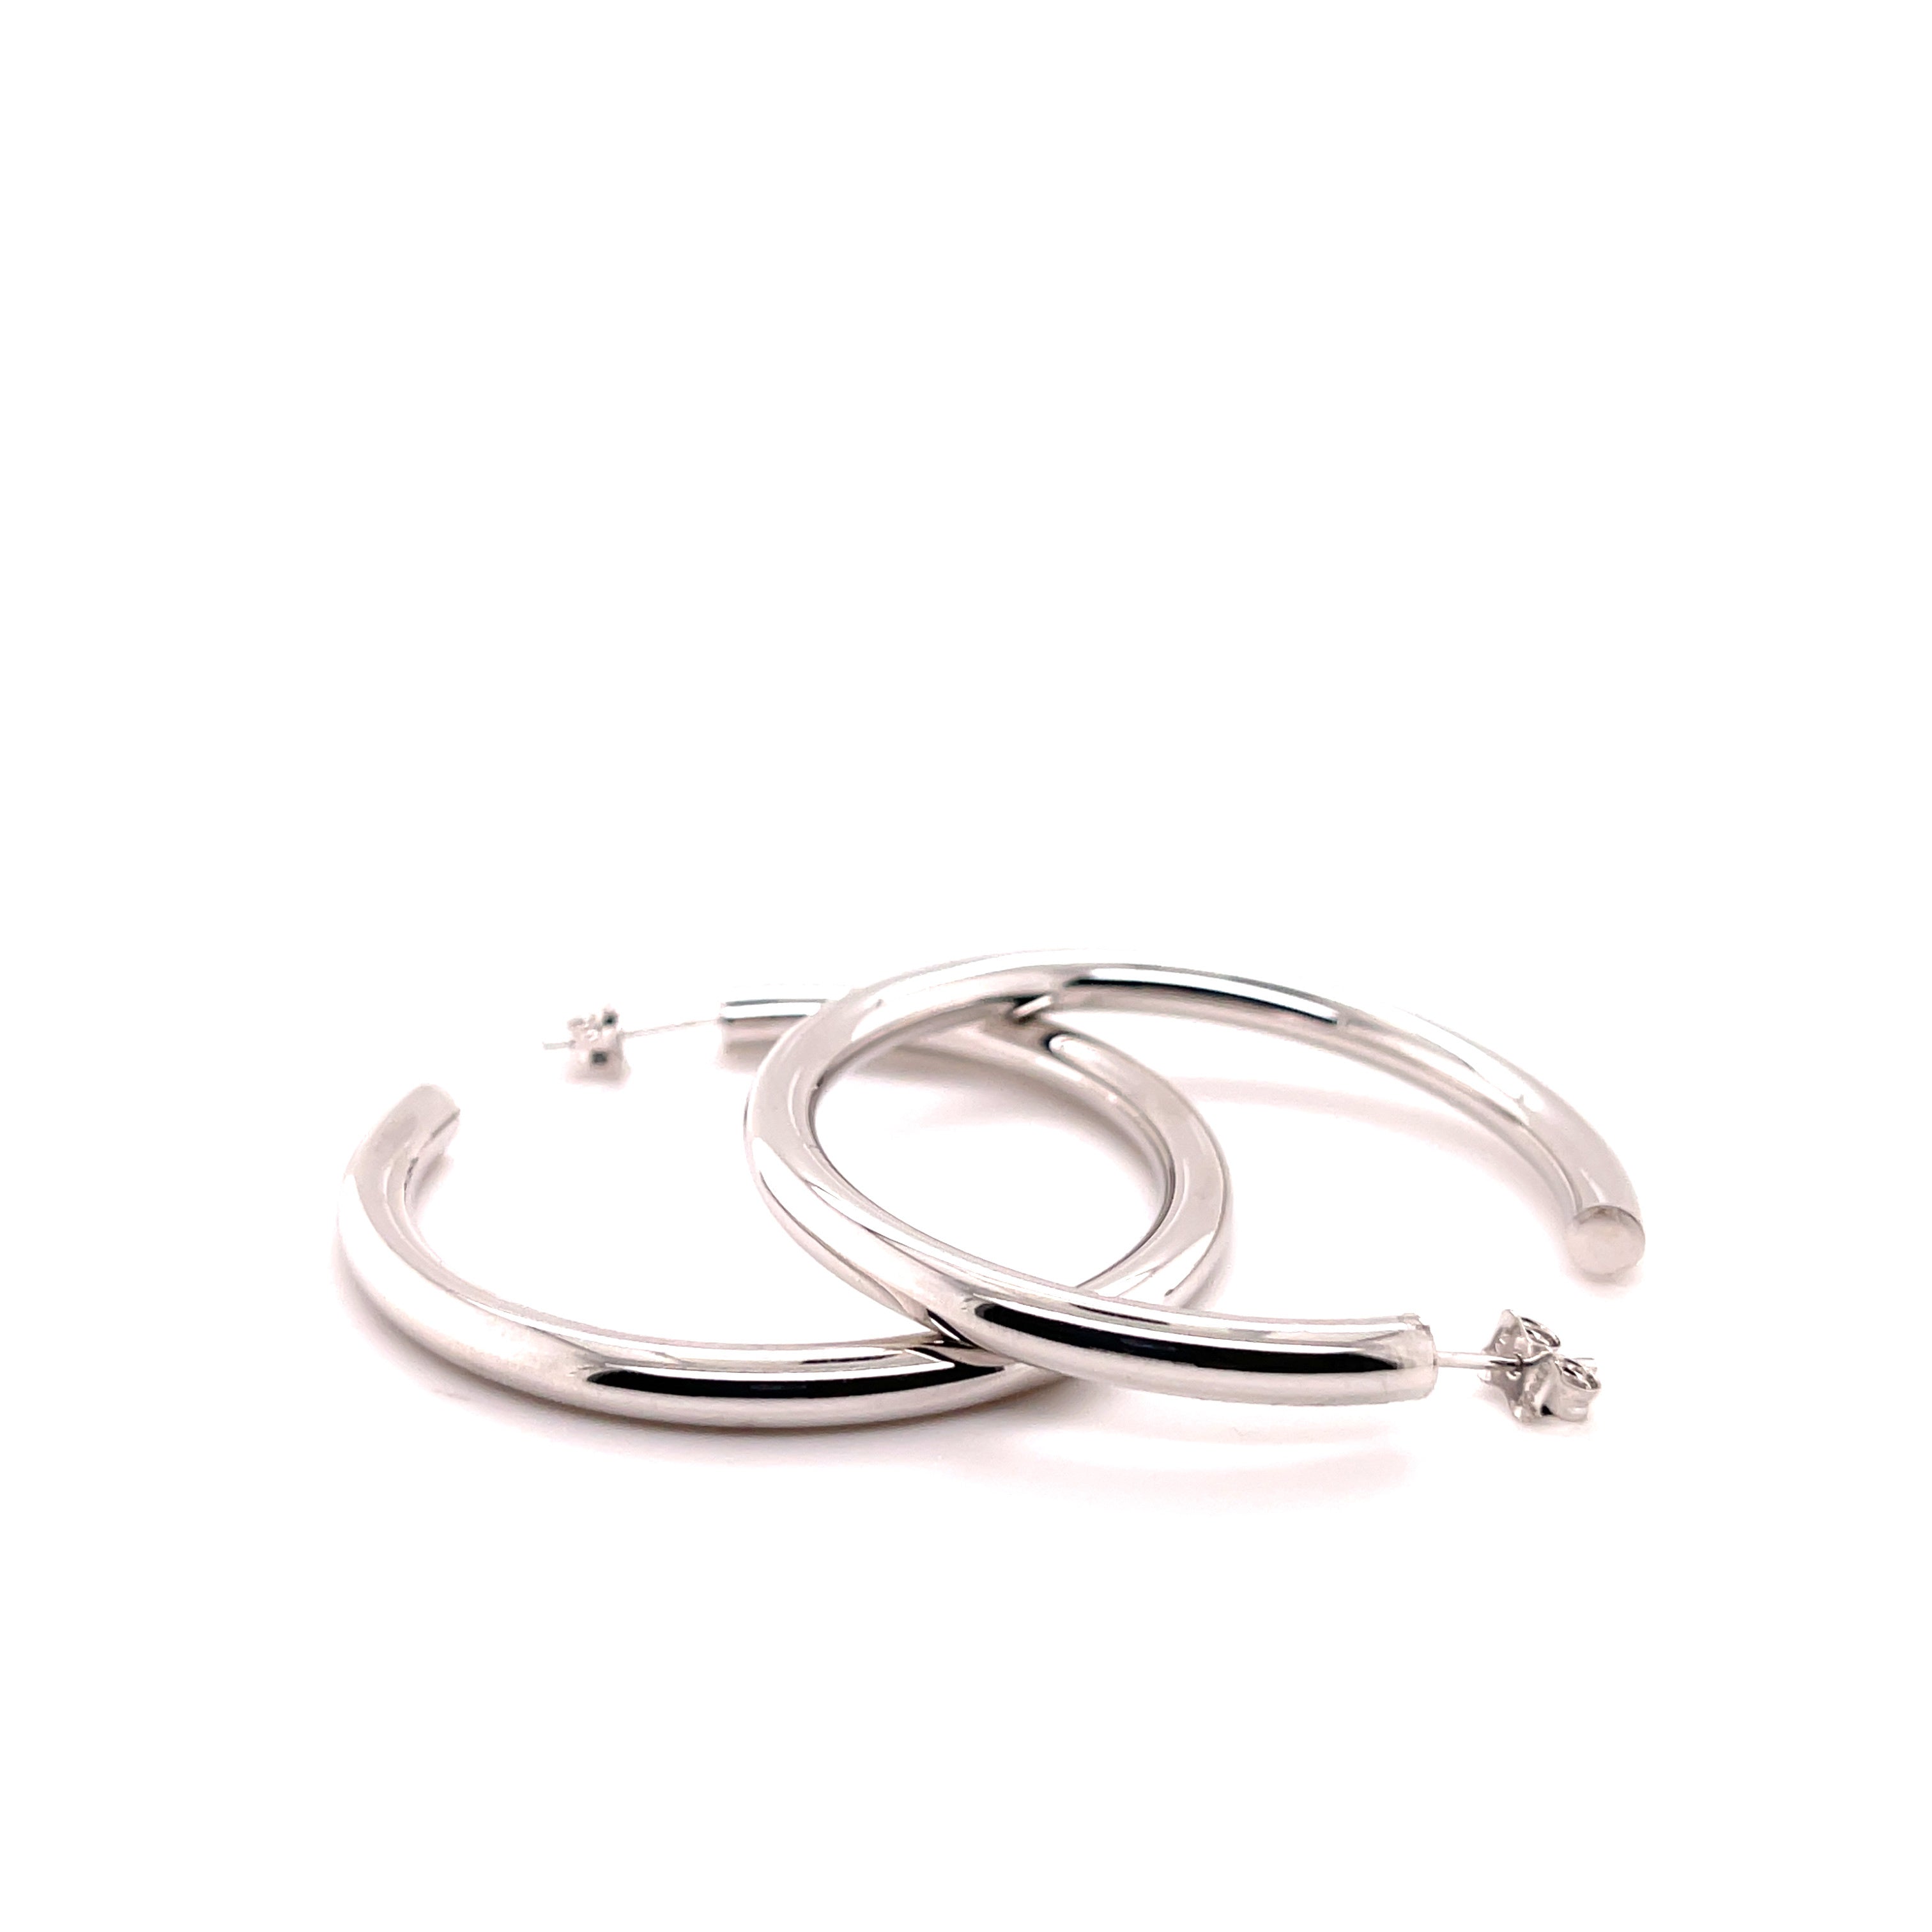 14K White Gold 4 mm Thick C Hoops